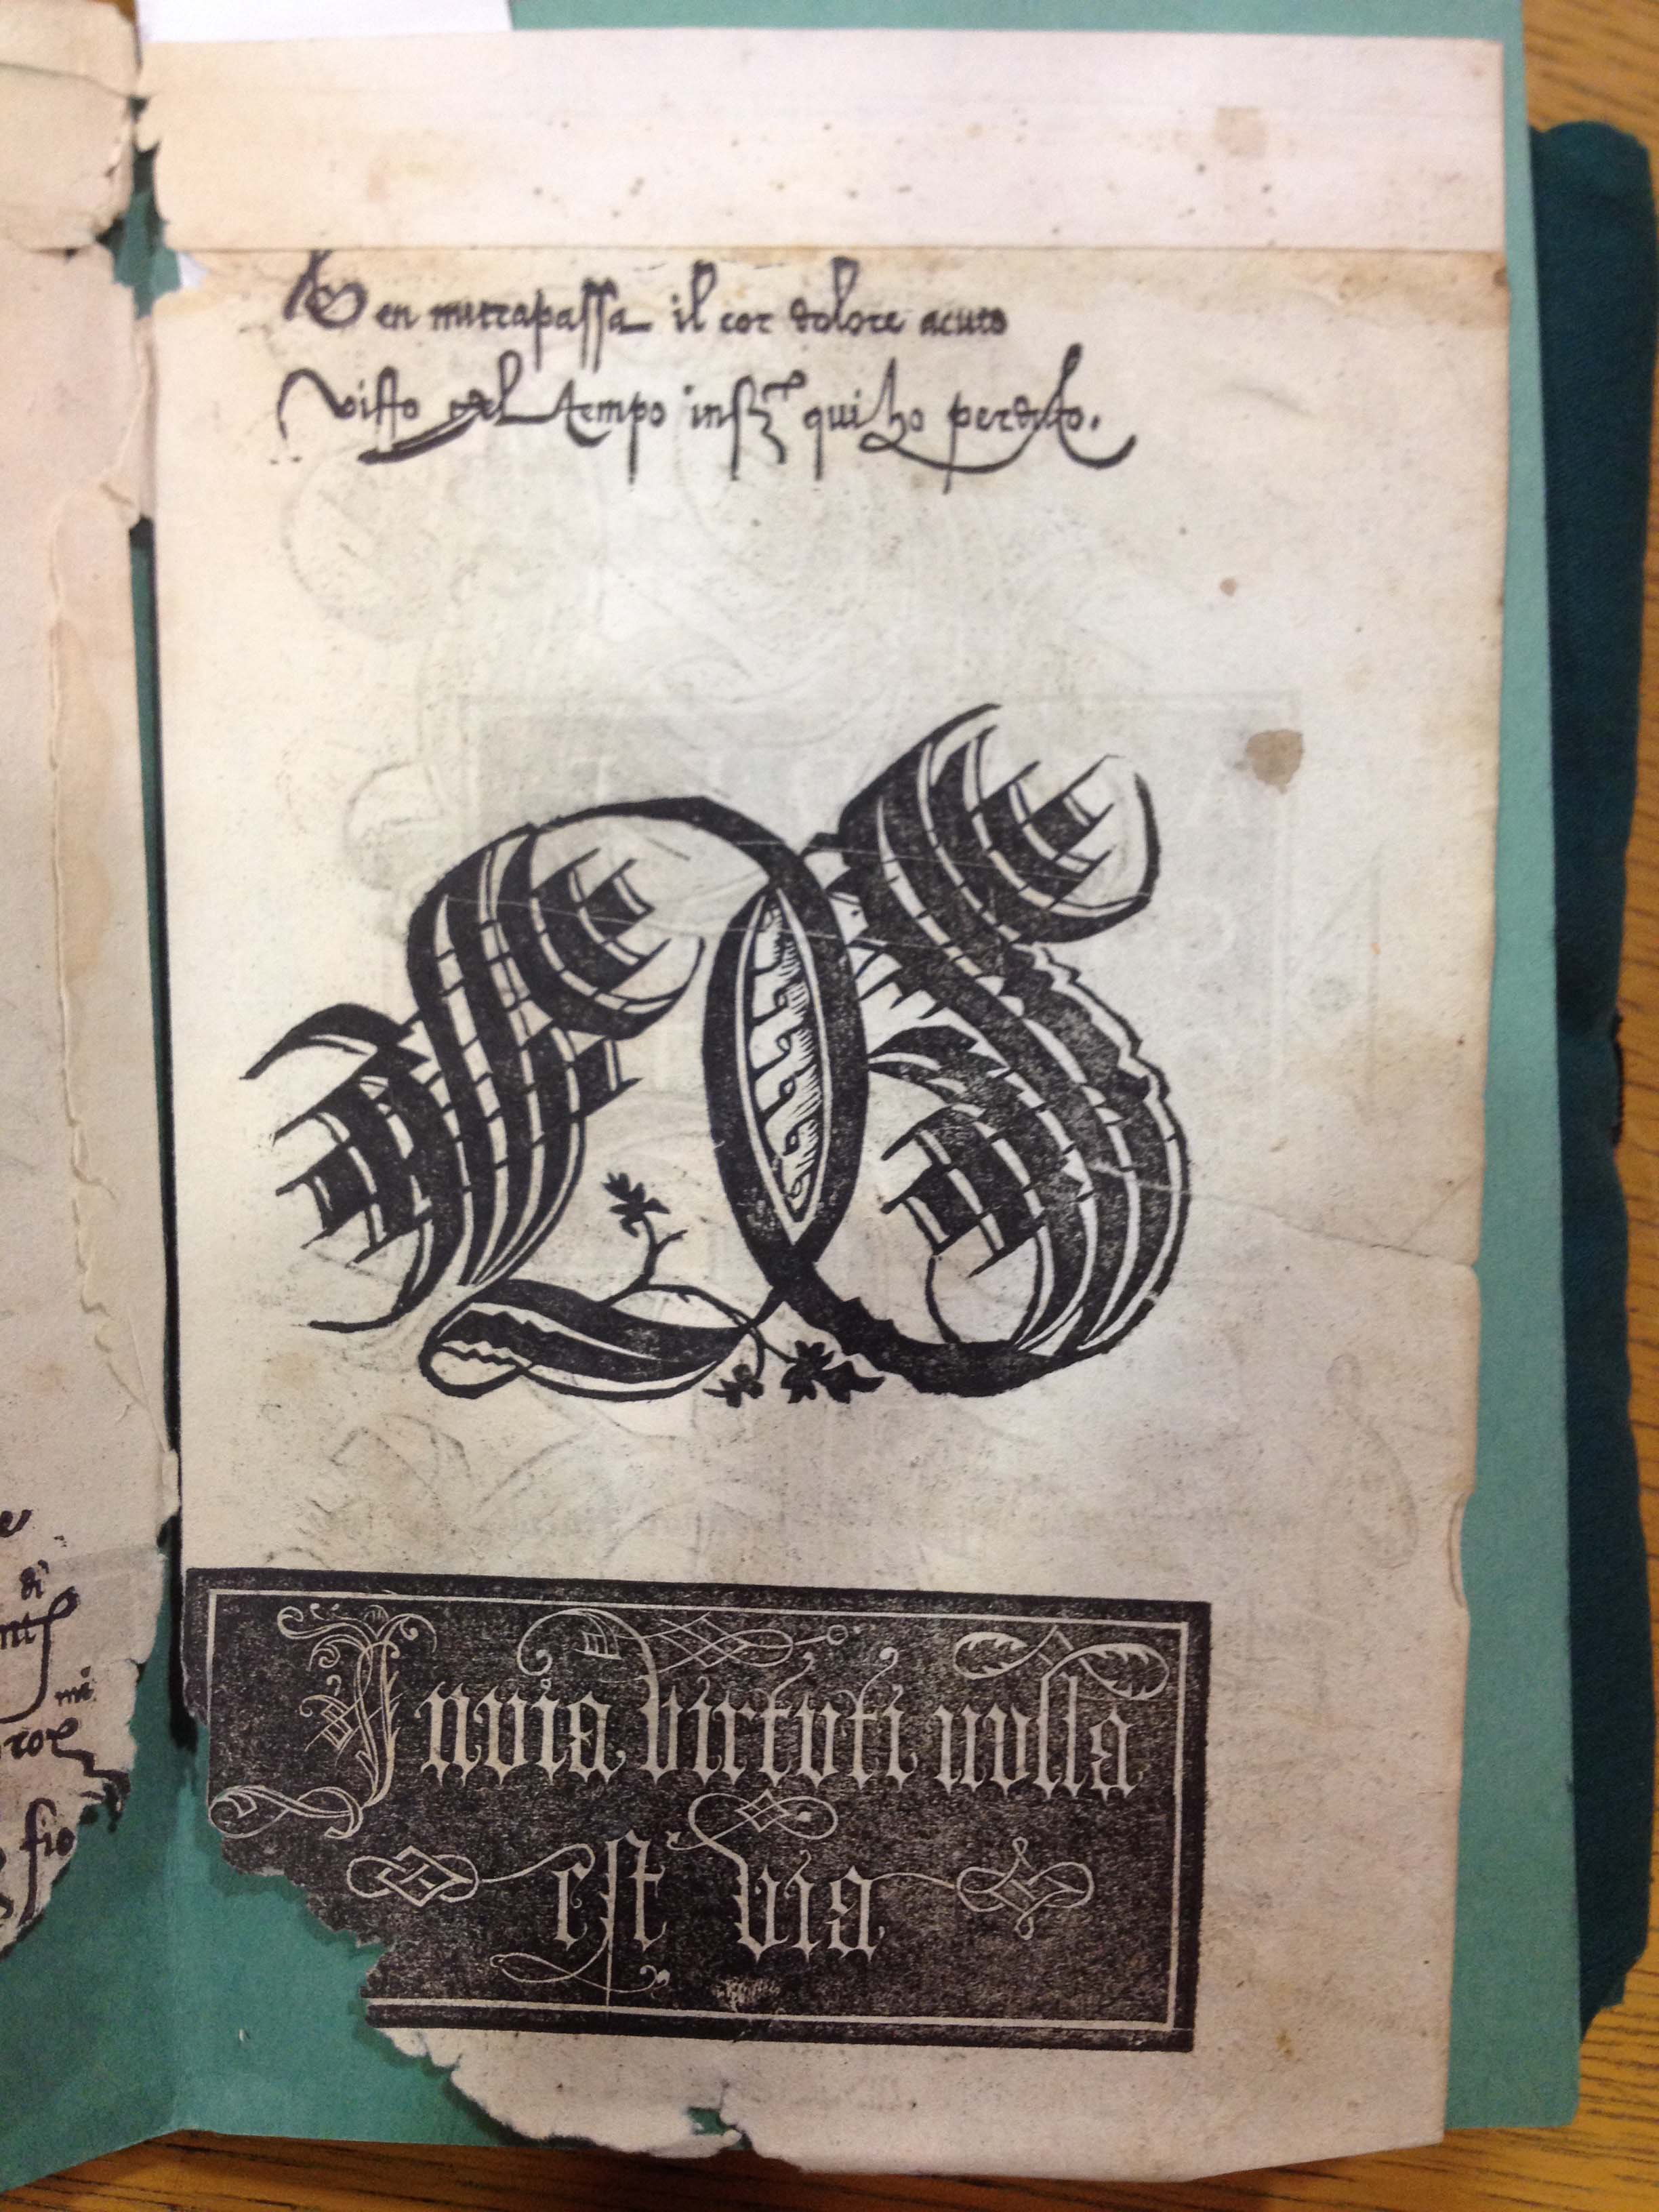 A Verini book that survives in spite of damage @ The Newberry Library